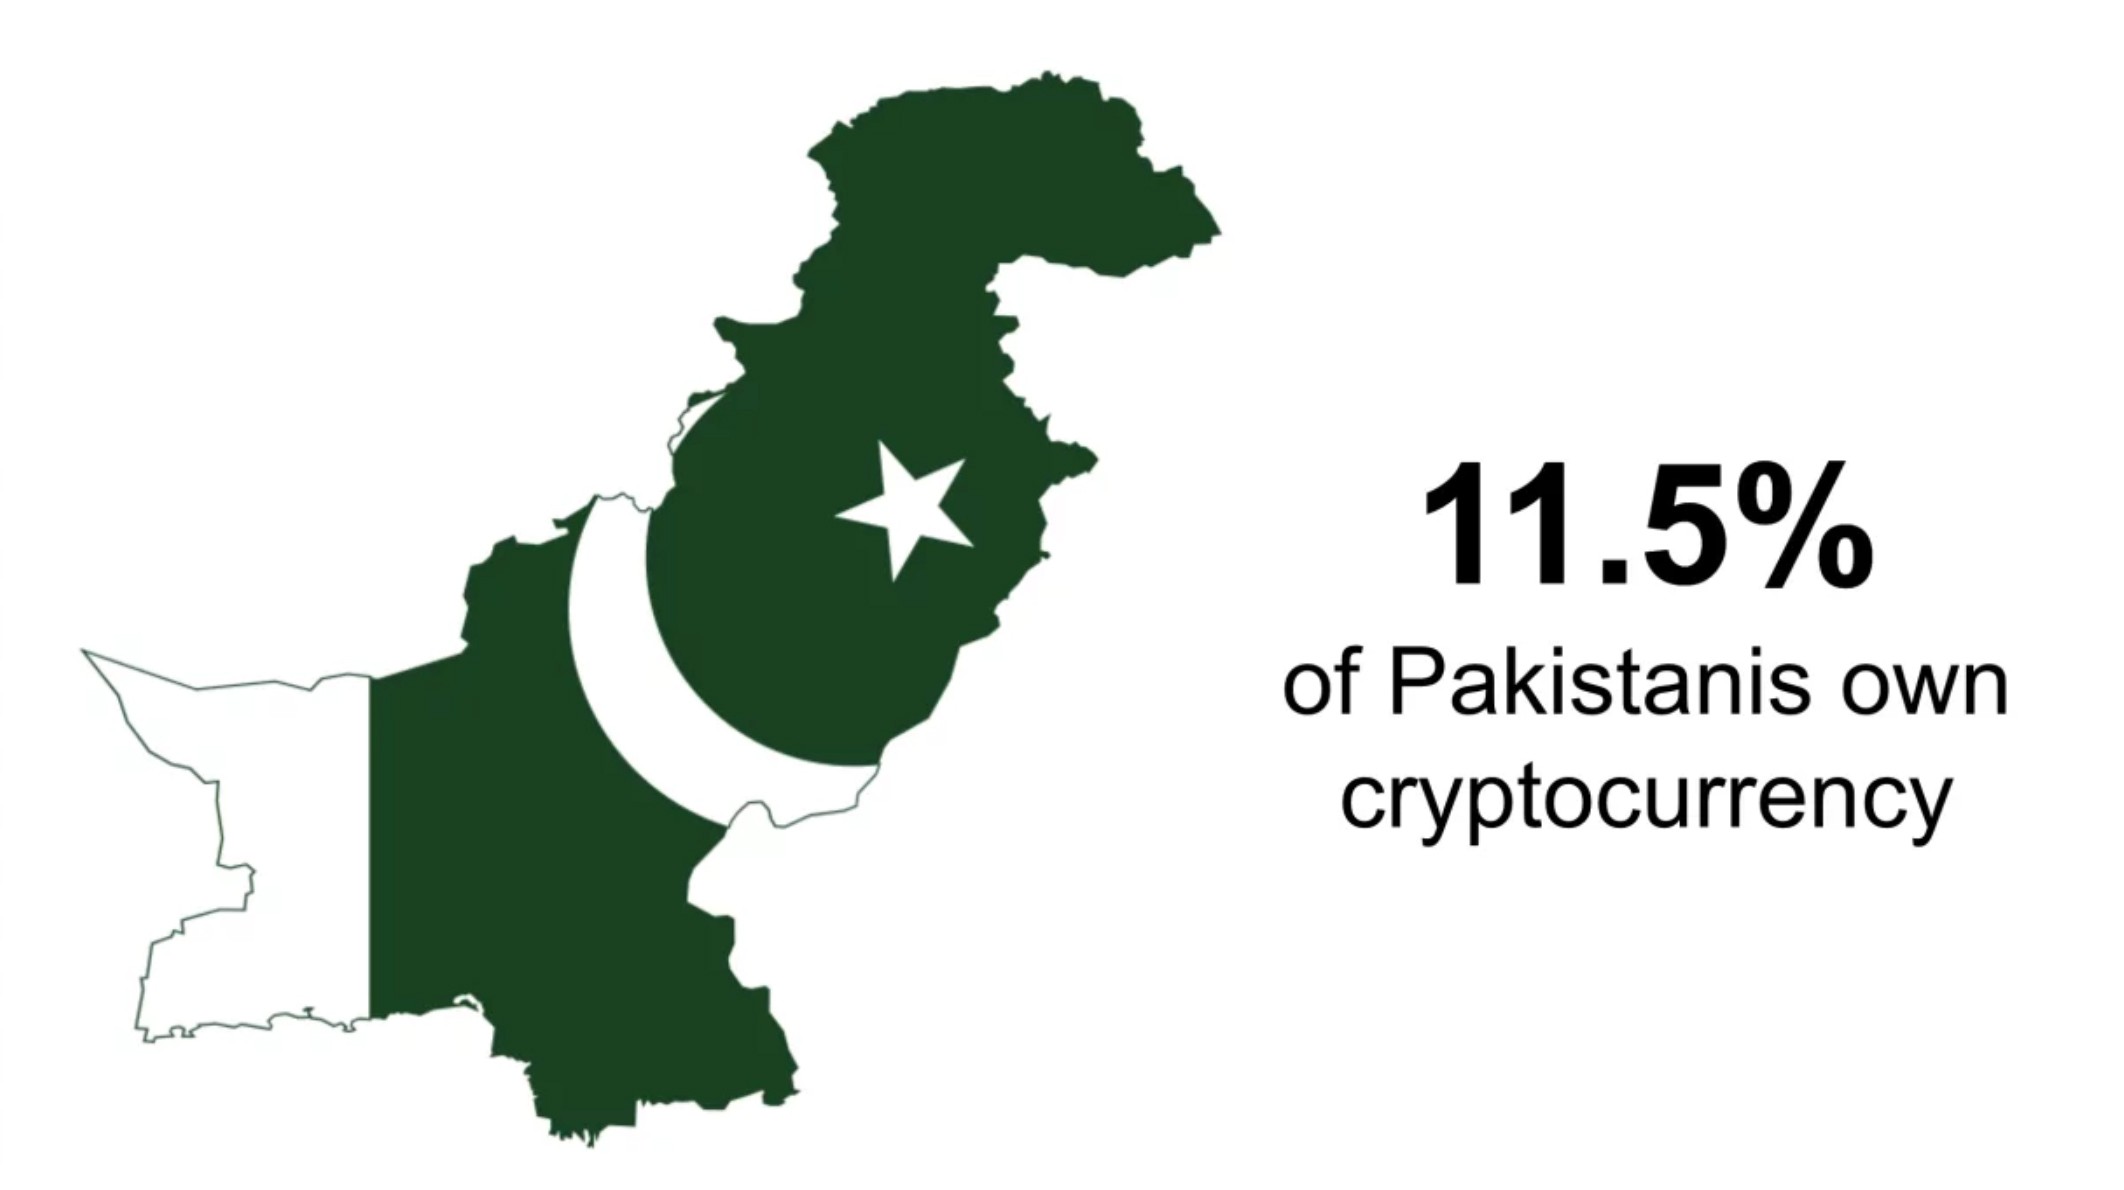 Cryptocurrencies in Pakistan: time has come